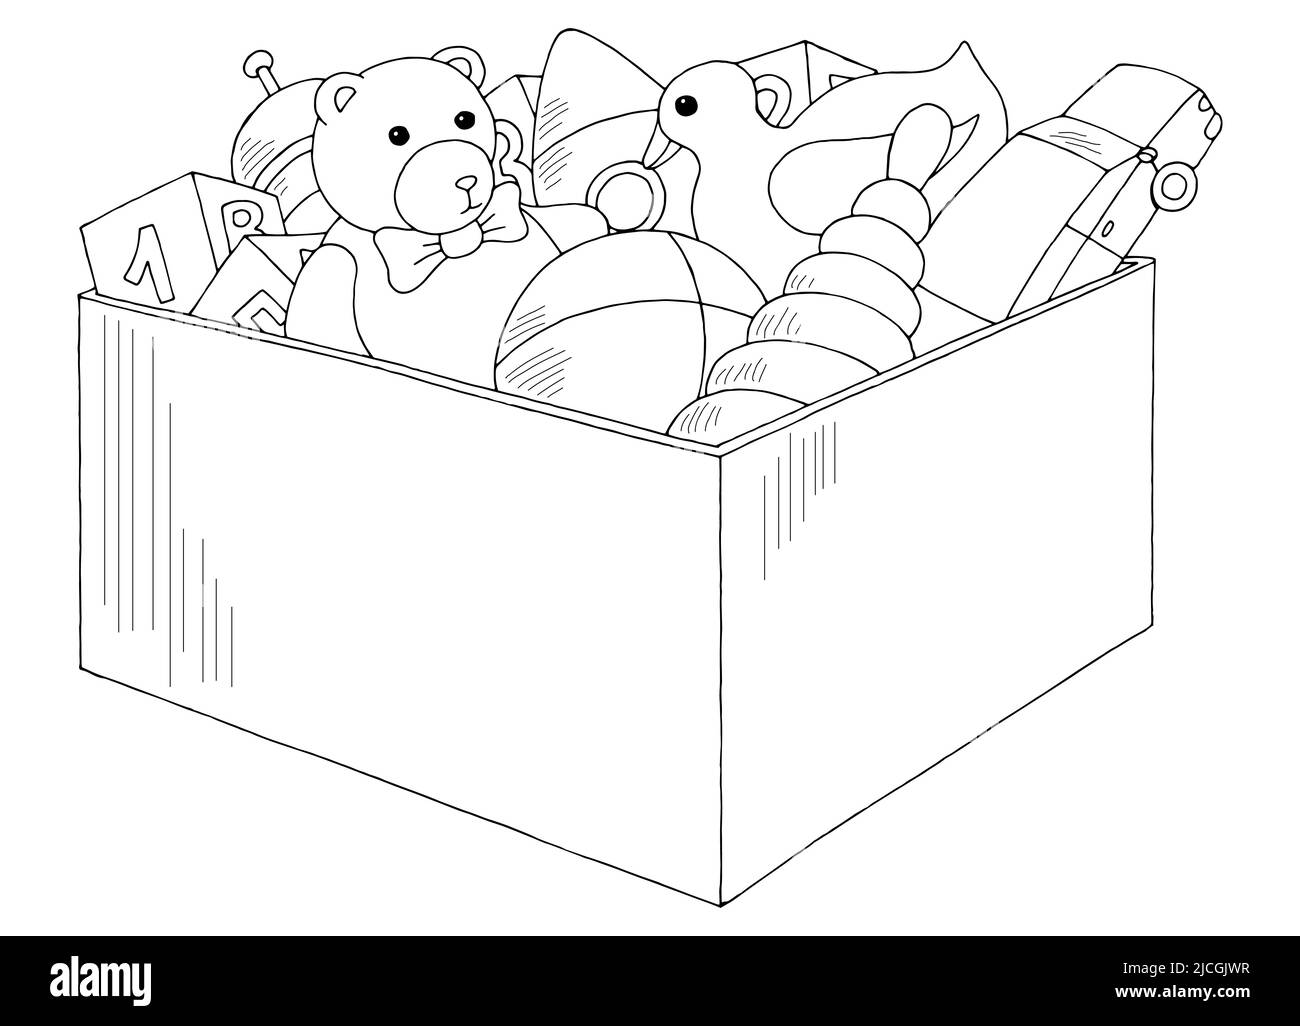 Toy in box graphic black white isolated sketch illustration vector Stock Vector